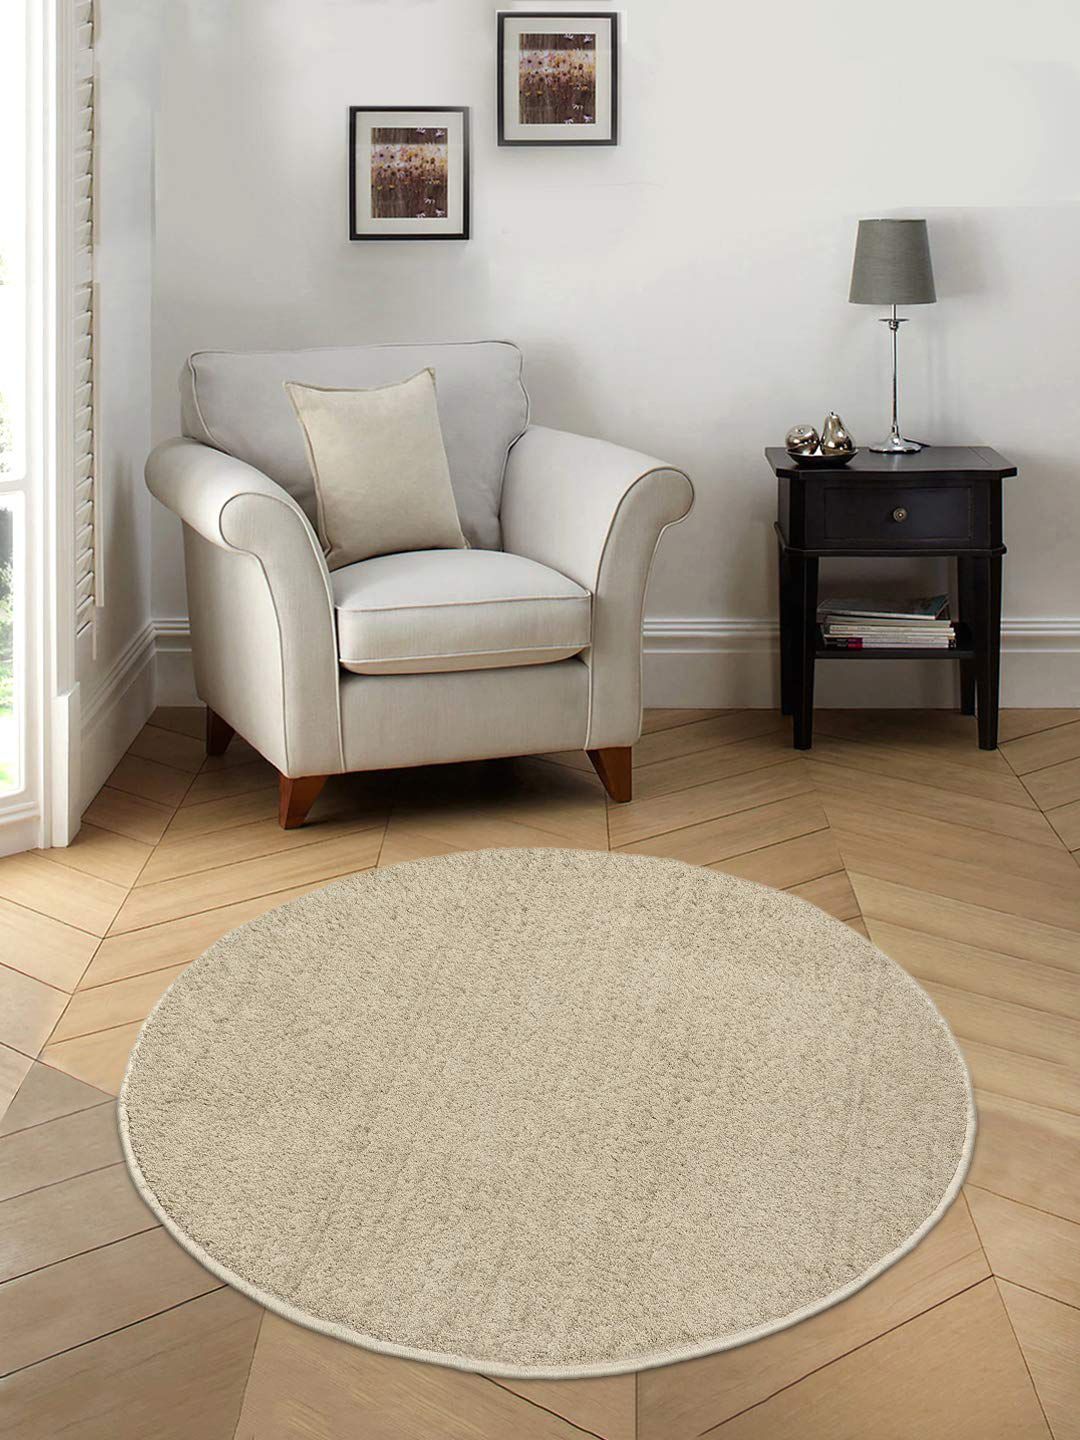 Saral Home Beige Solid Cotton Anti-Skid Shaggy Round Floor Mats Price in India